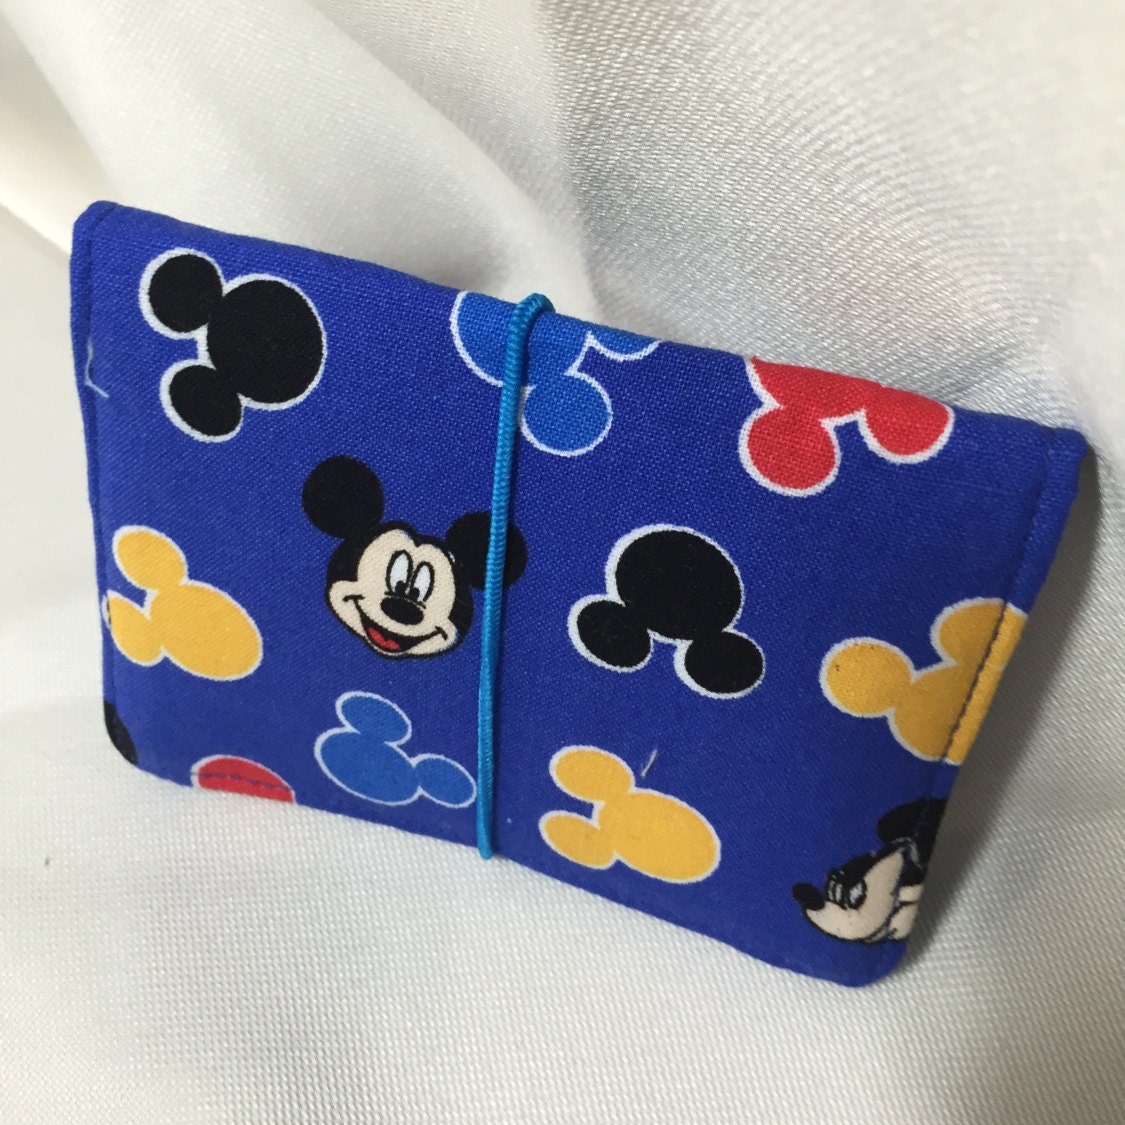 Credit Card Wallet/Holder Disney/Mickey Mouse by